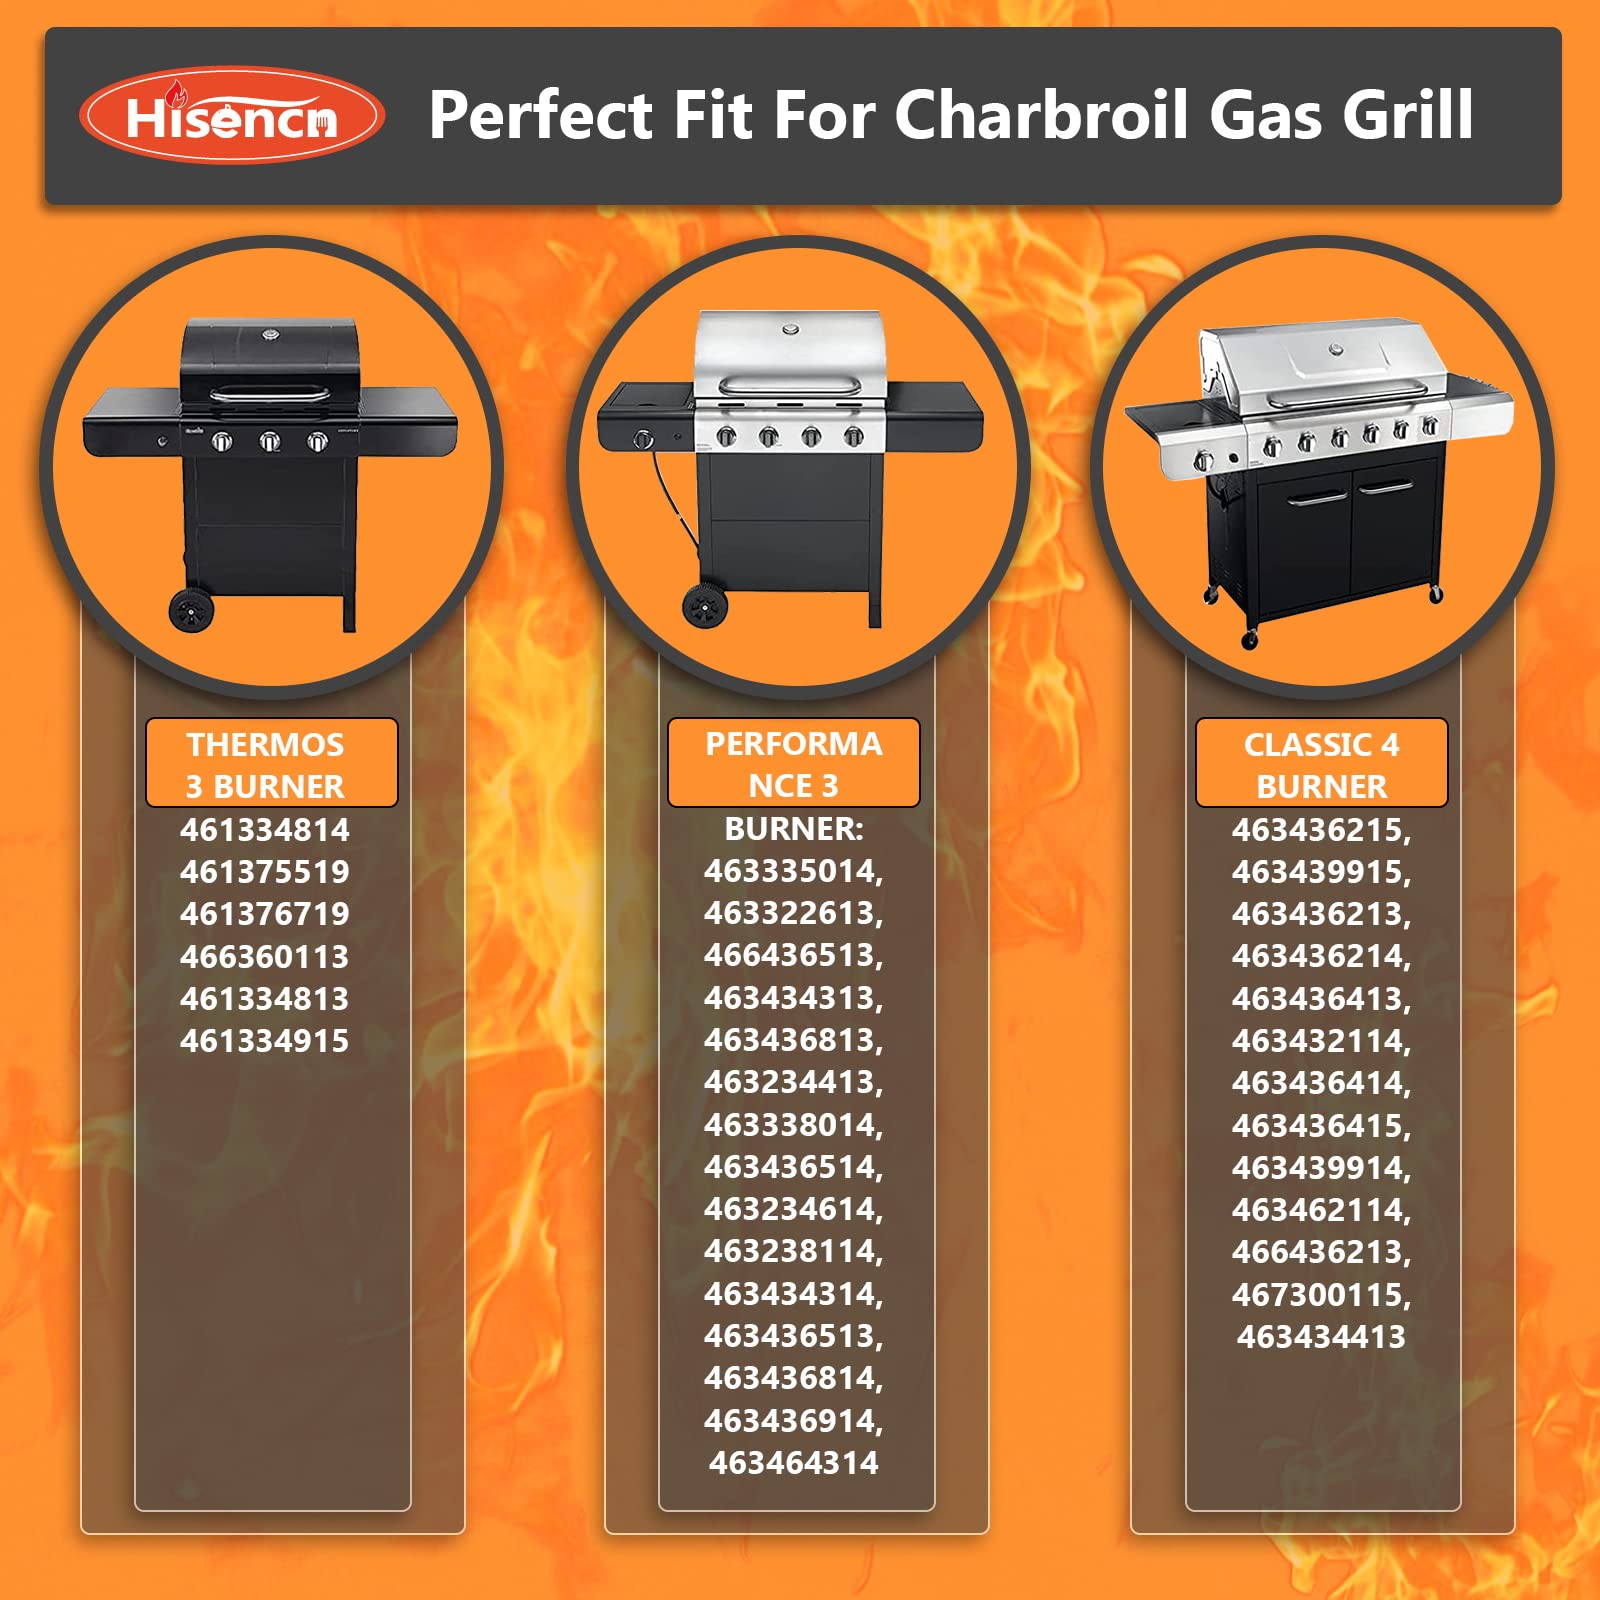 Hisencn Grill Replacement Parts for Charbroil 463436215, 463436214, 463436213, 463439915, 467300115, 463439914, 461372517, G432-